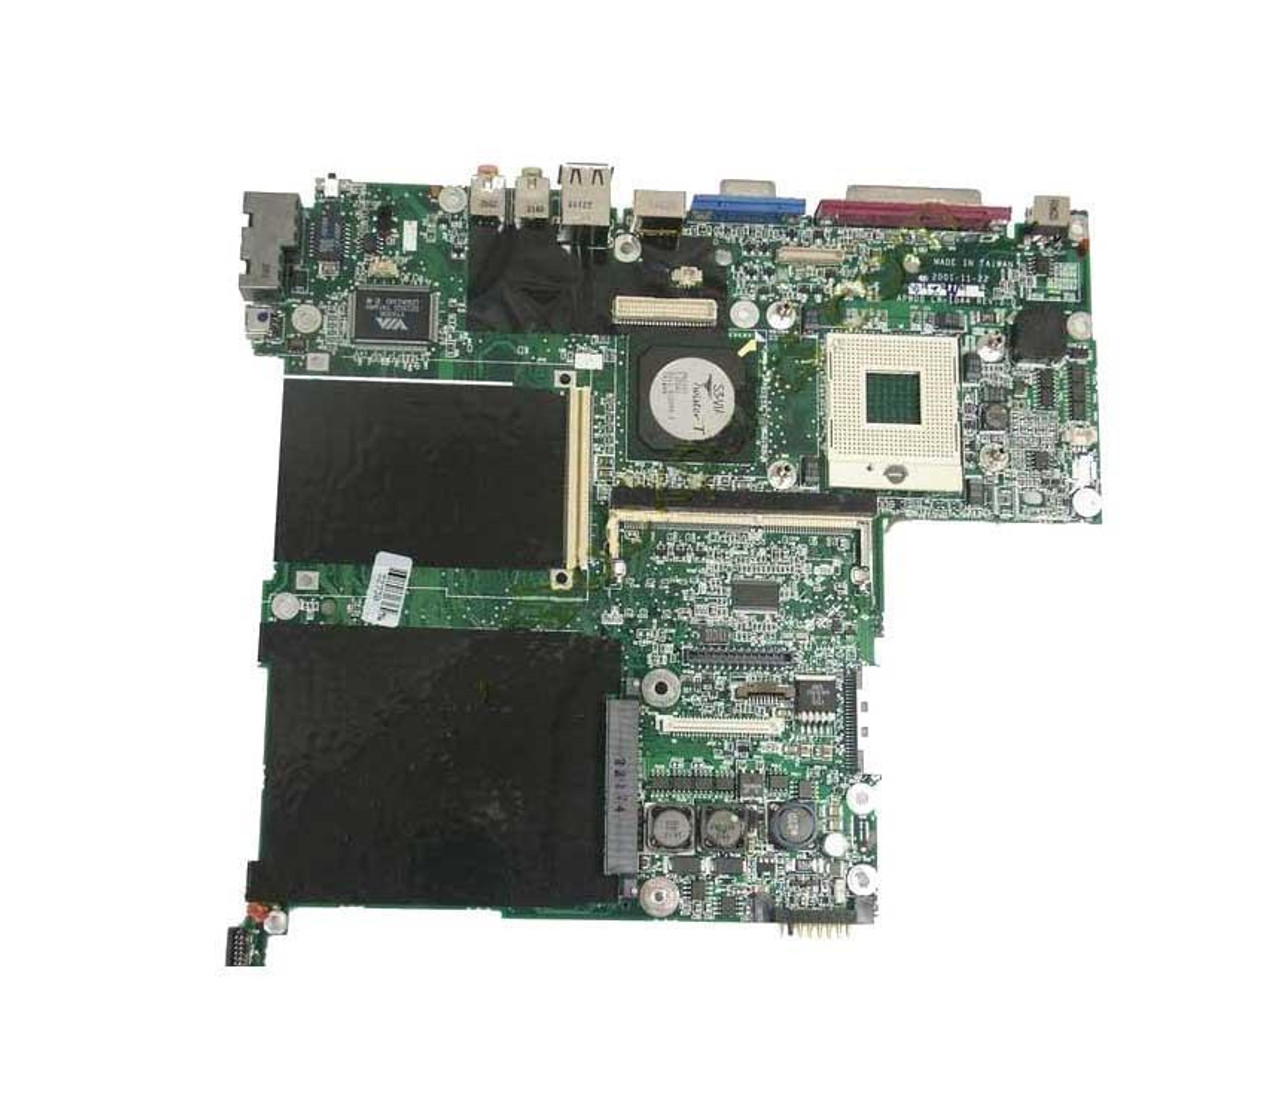 F3379-69001 HP System Board (MotherBoard) Pavilion ZT1000 & ZT1100 Series for Pentium III with Bluetooth Notebook PC (Refurbished)